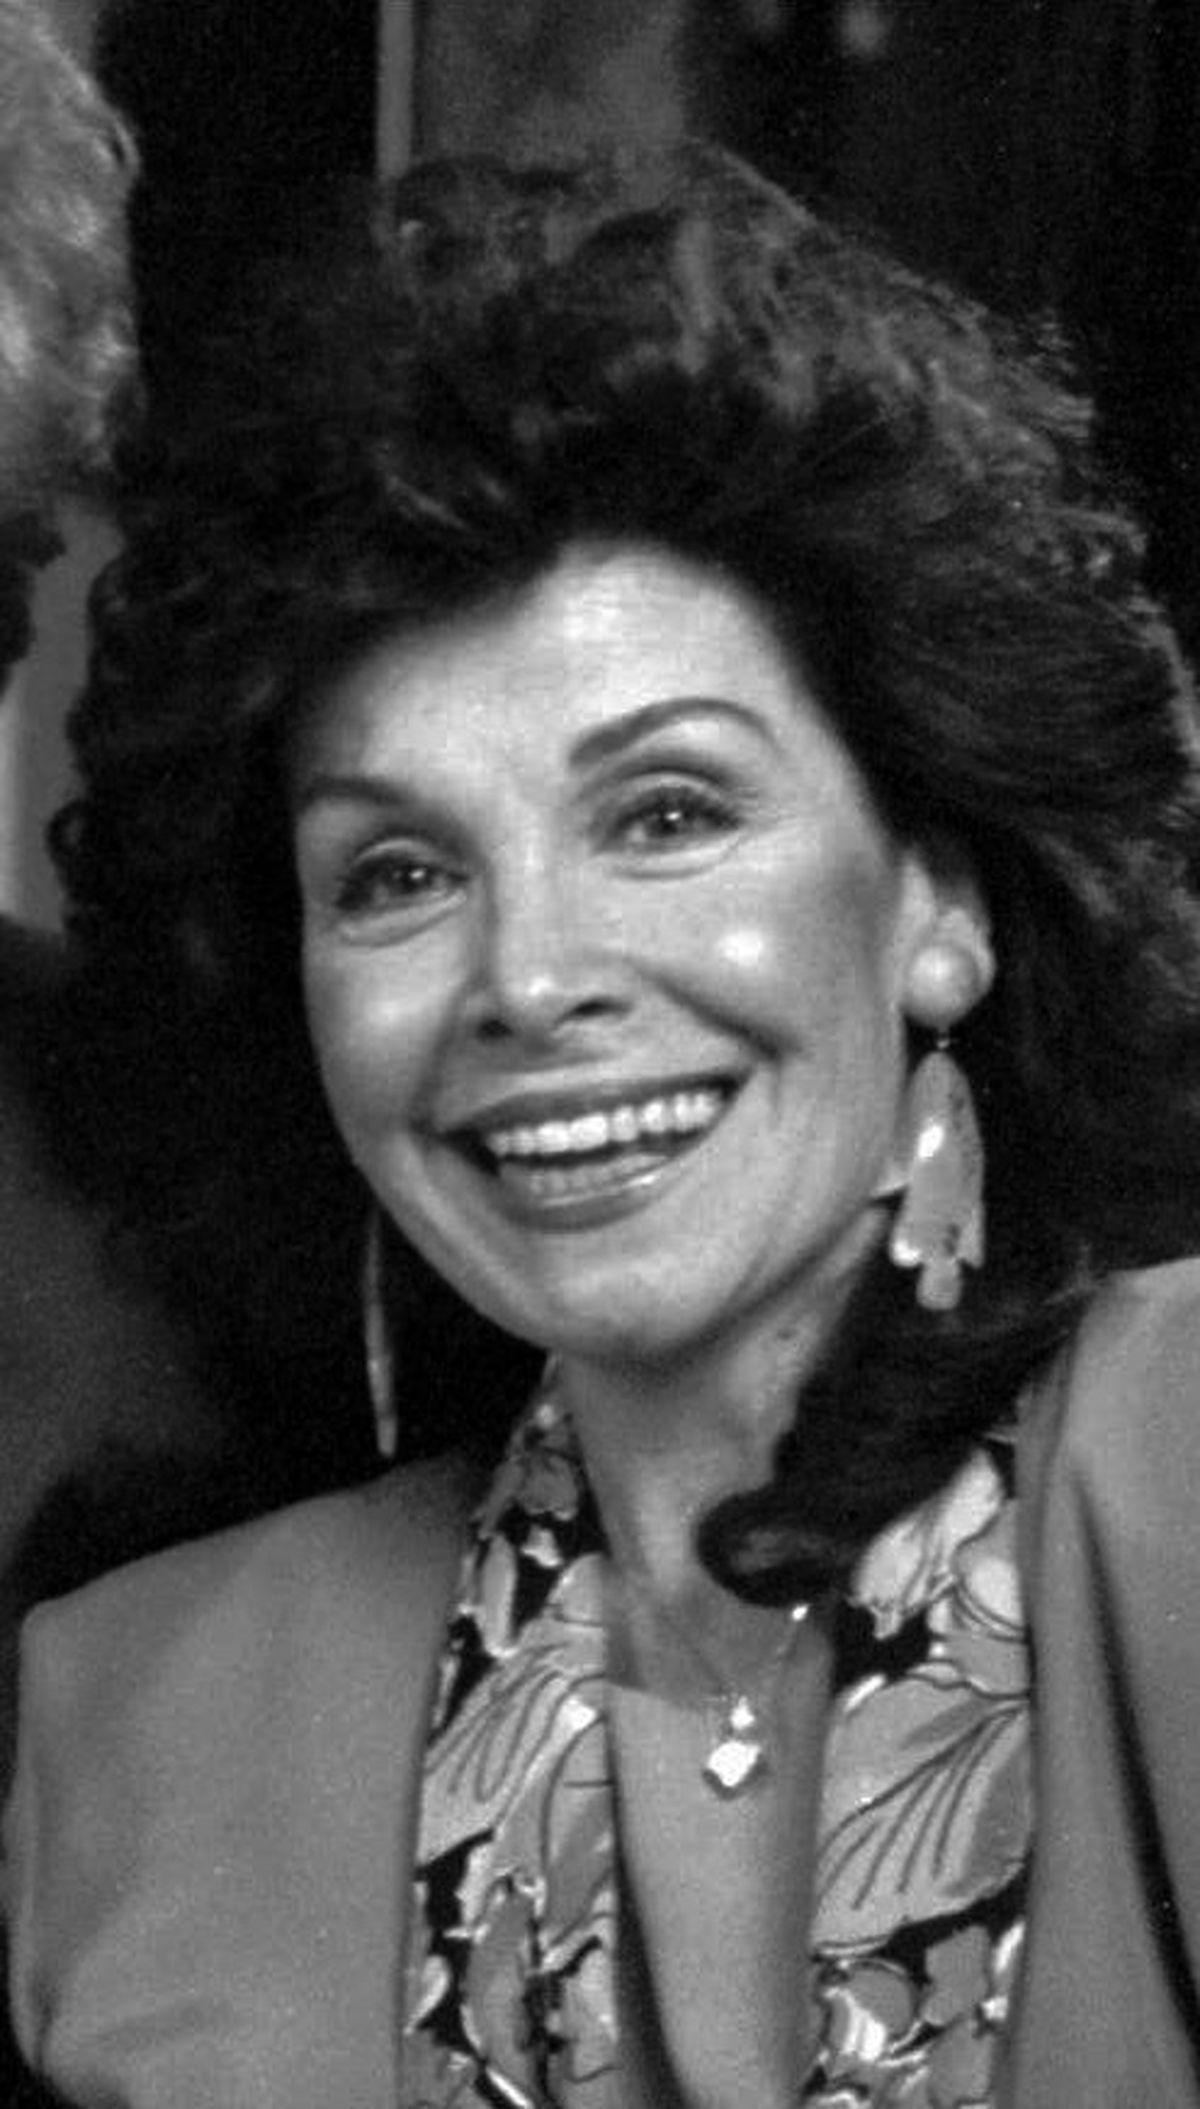 Pictures of annette funicello